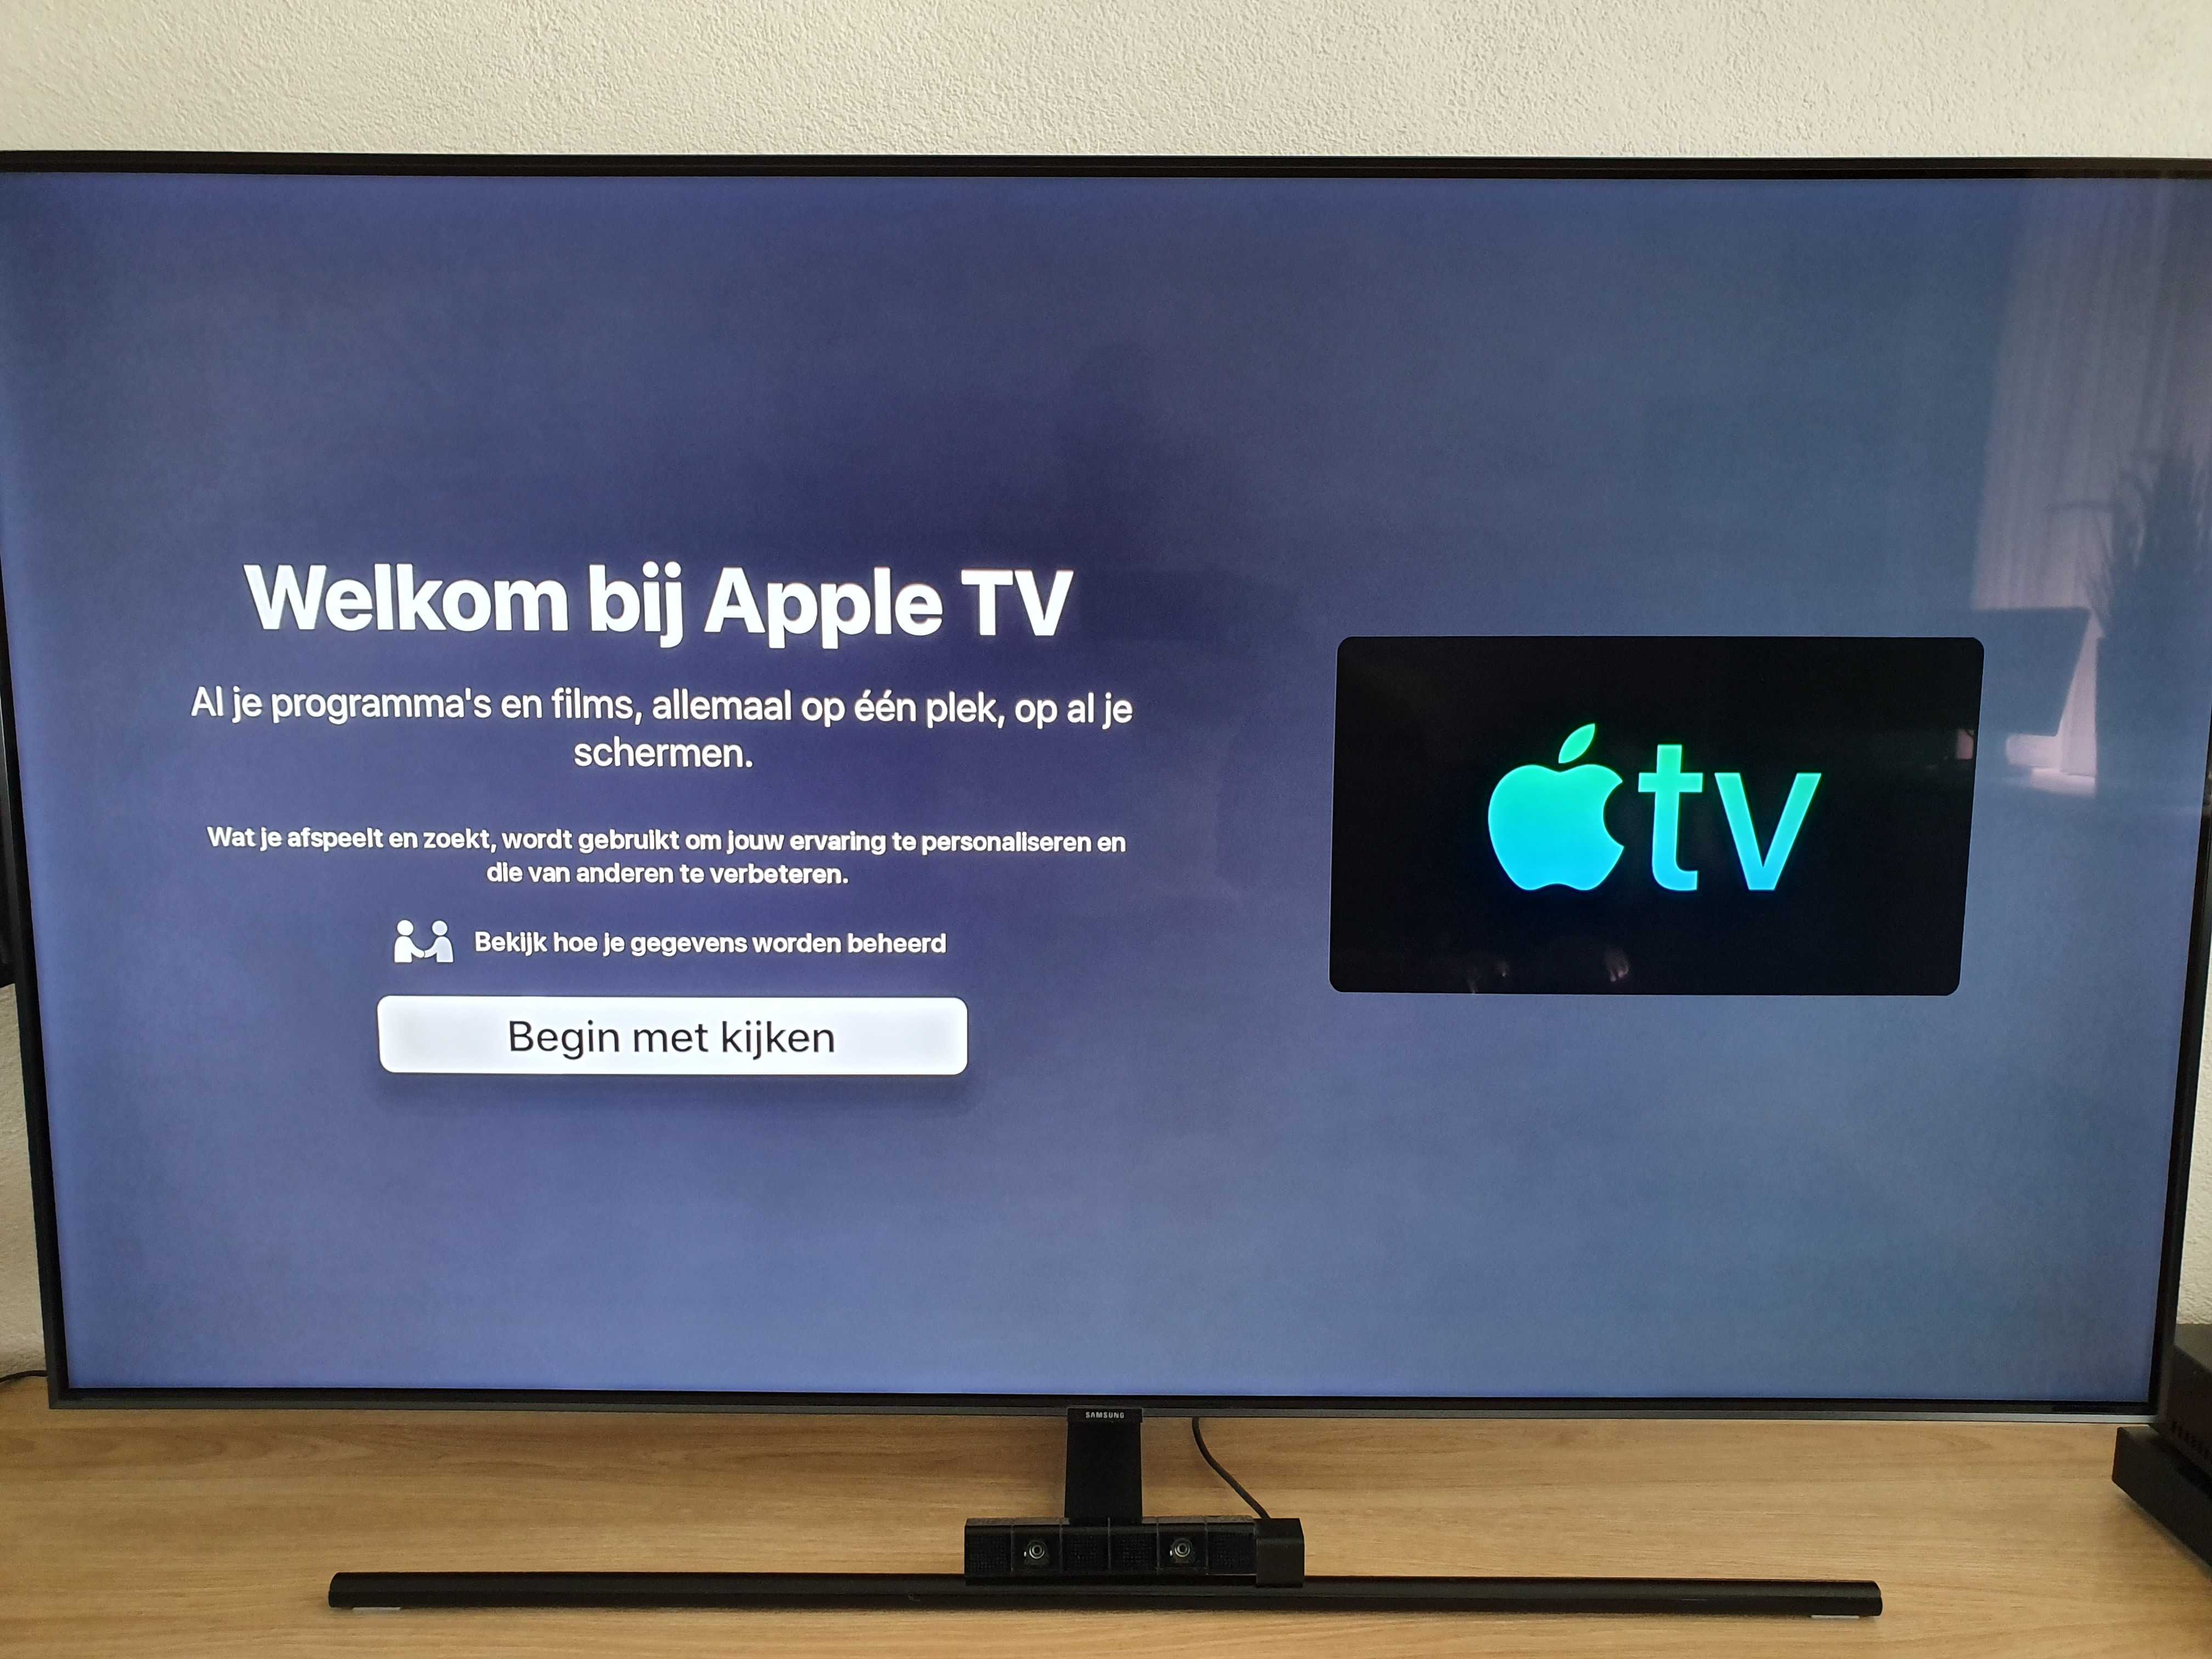 New Apple TV app rolling out for Smart TVs -